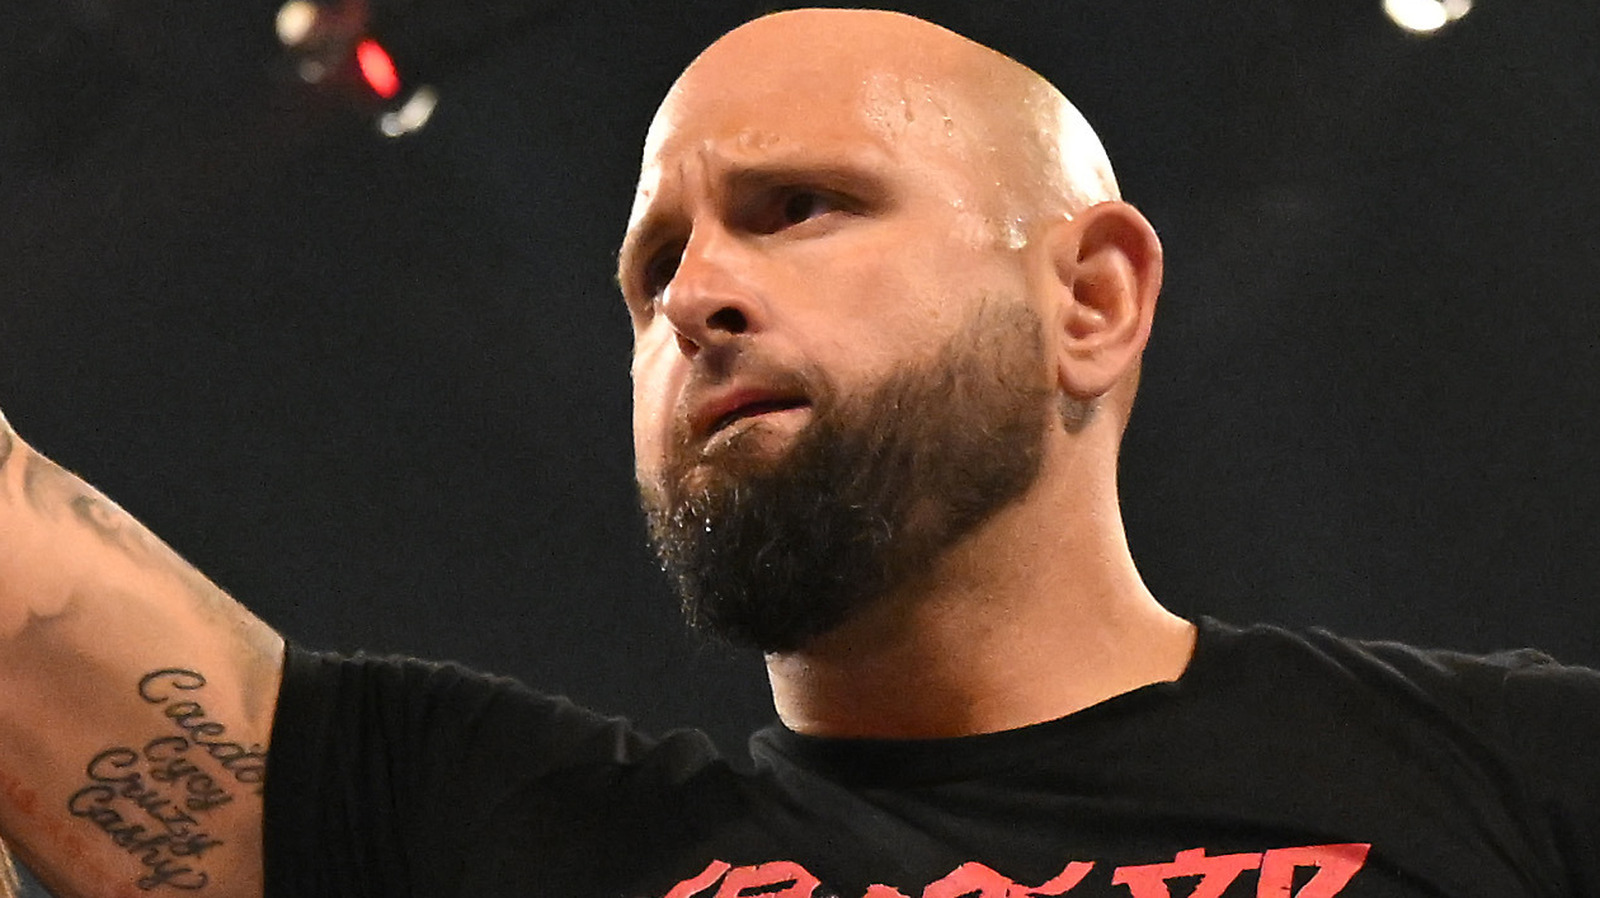 NJPW Releases Statement On Karl Anderson Situation